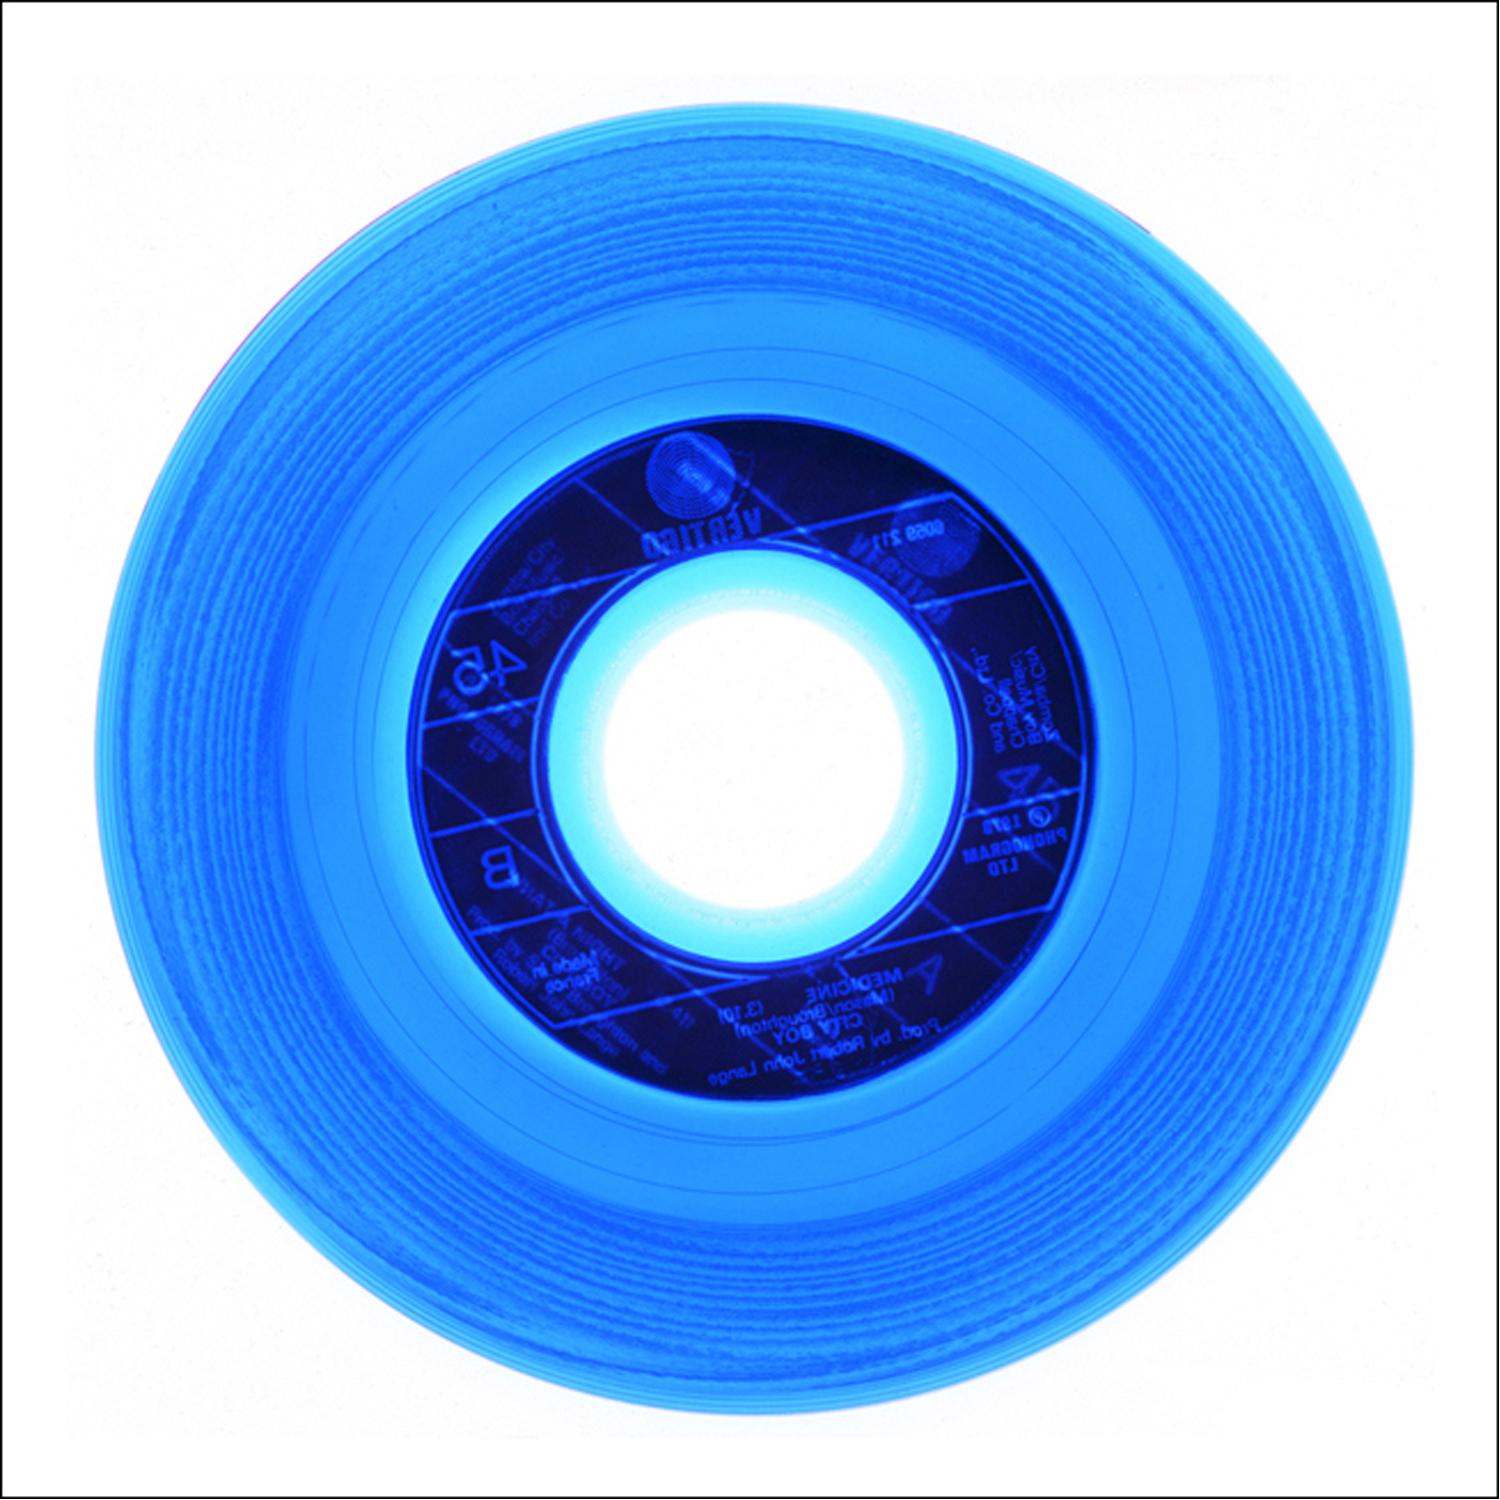 Made in France, a blue artwork in the Heidler & Heeps B Side Vinyl Collection.
Acclaimed contemporary photographers, Richard Heeps and Natasha Heidler have collaborated to make this beautifully mesmerising collection. A celebration of the vinyl